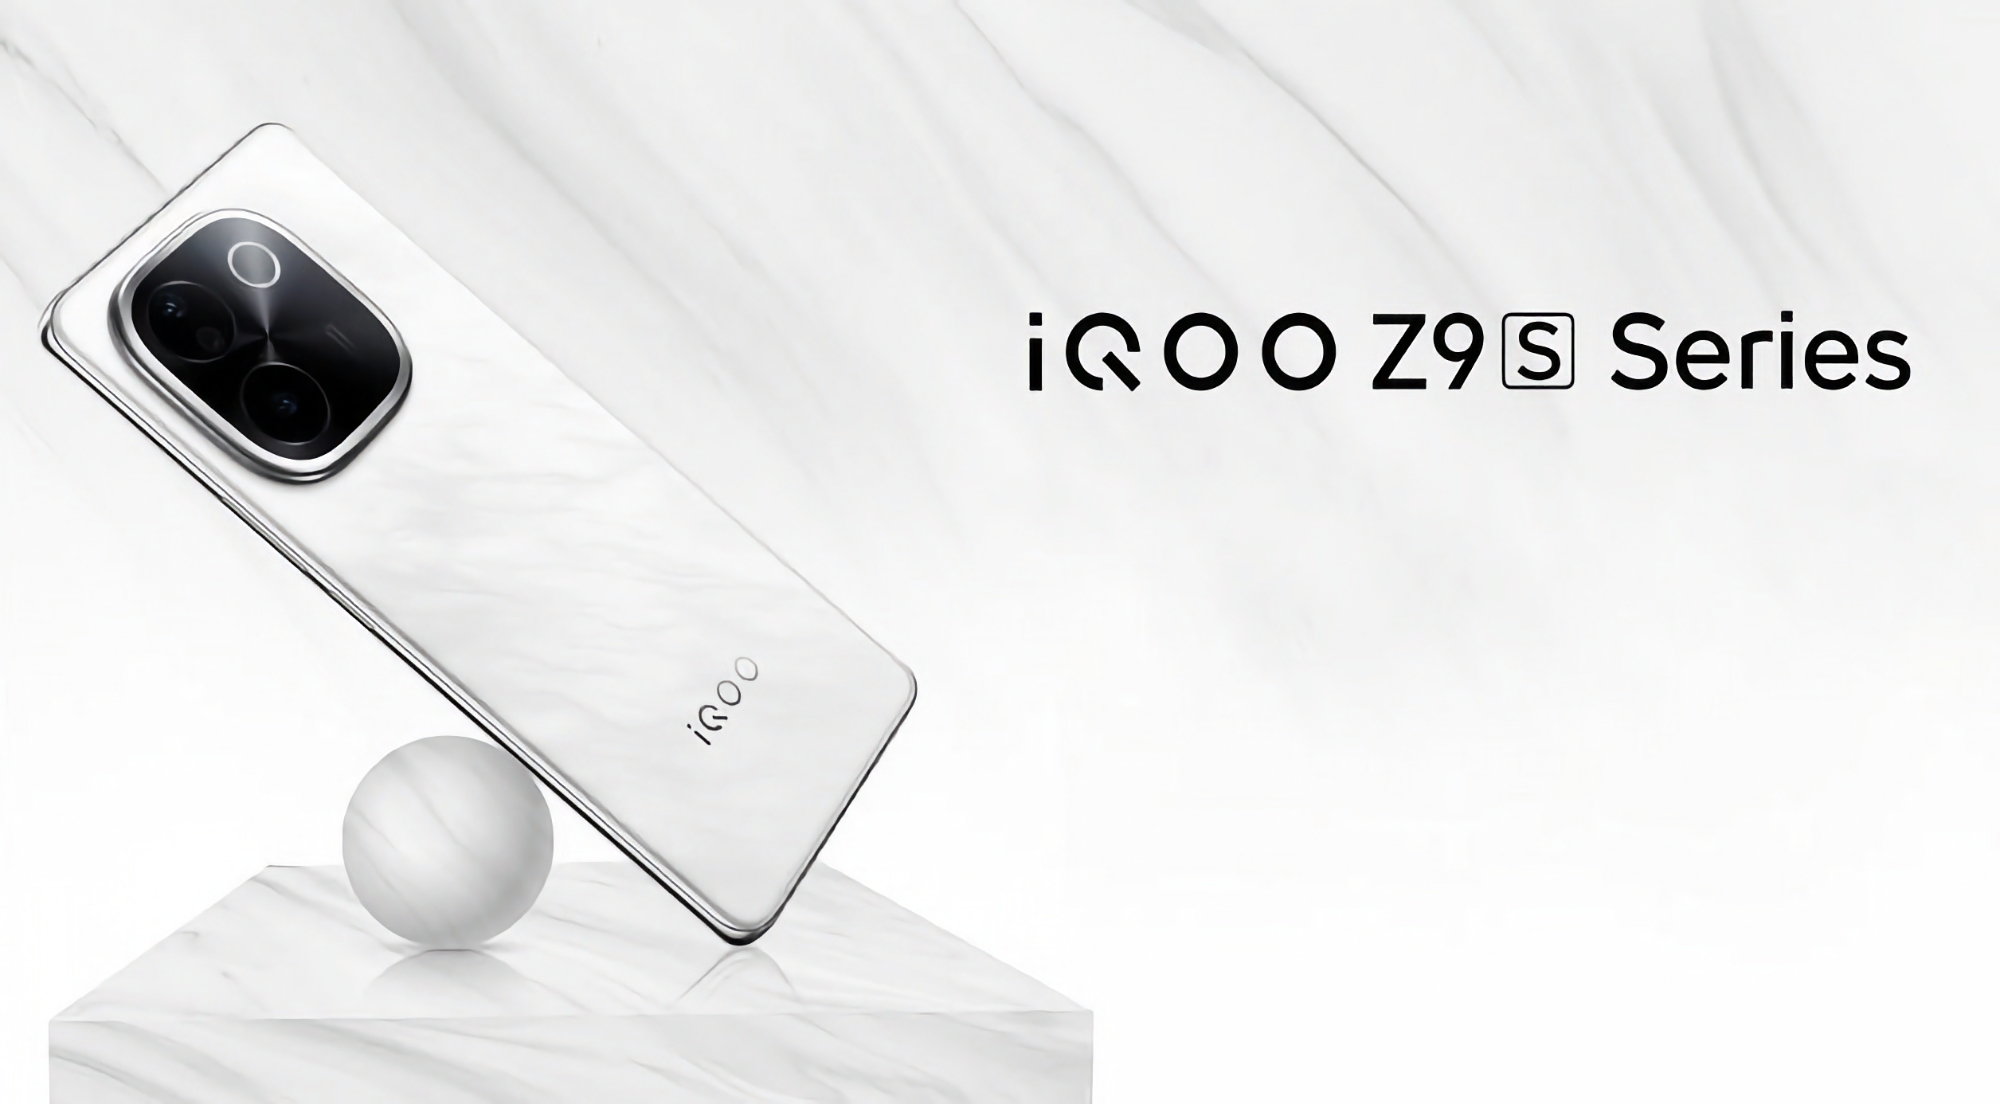 It's official: iQOO Z9s smartphone lineup will debut on 21 August